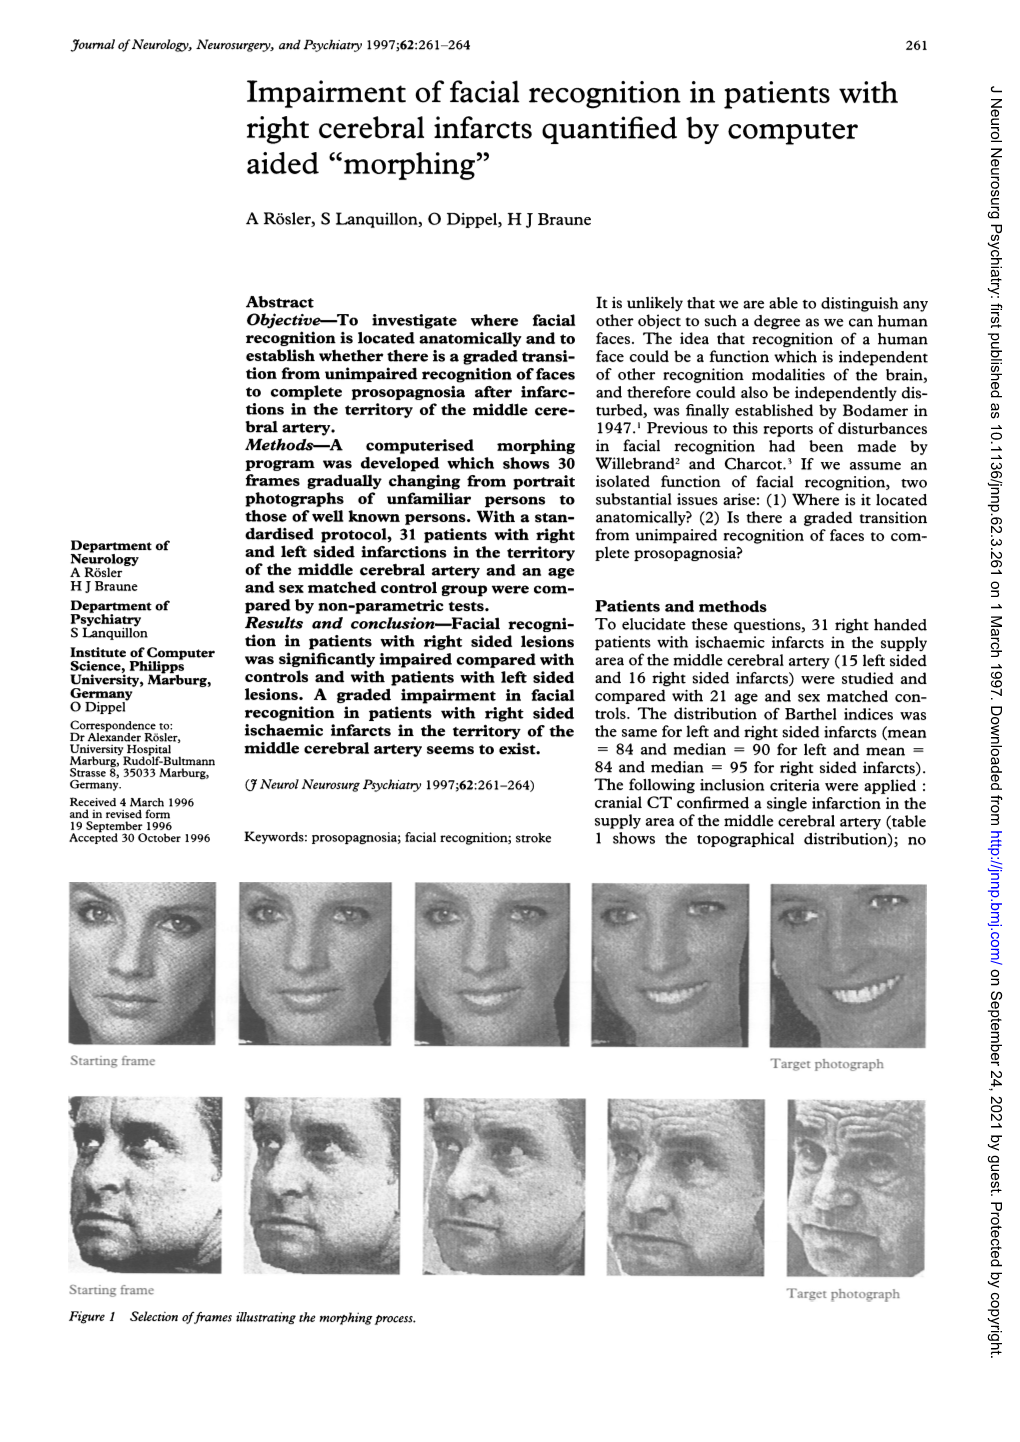 Impairment of Facial Recognition in Patients with Right Cerebral Infarcts